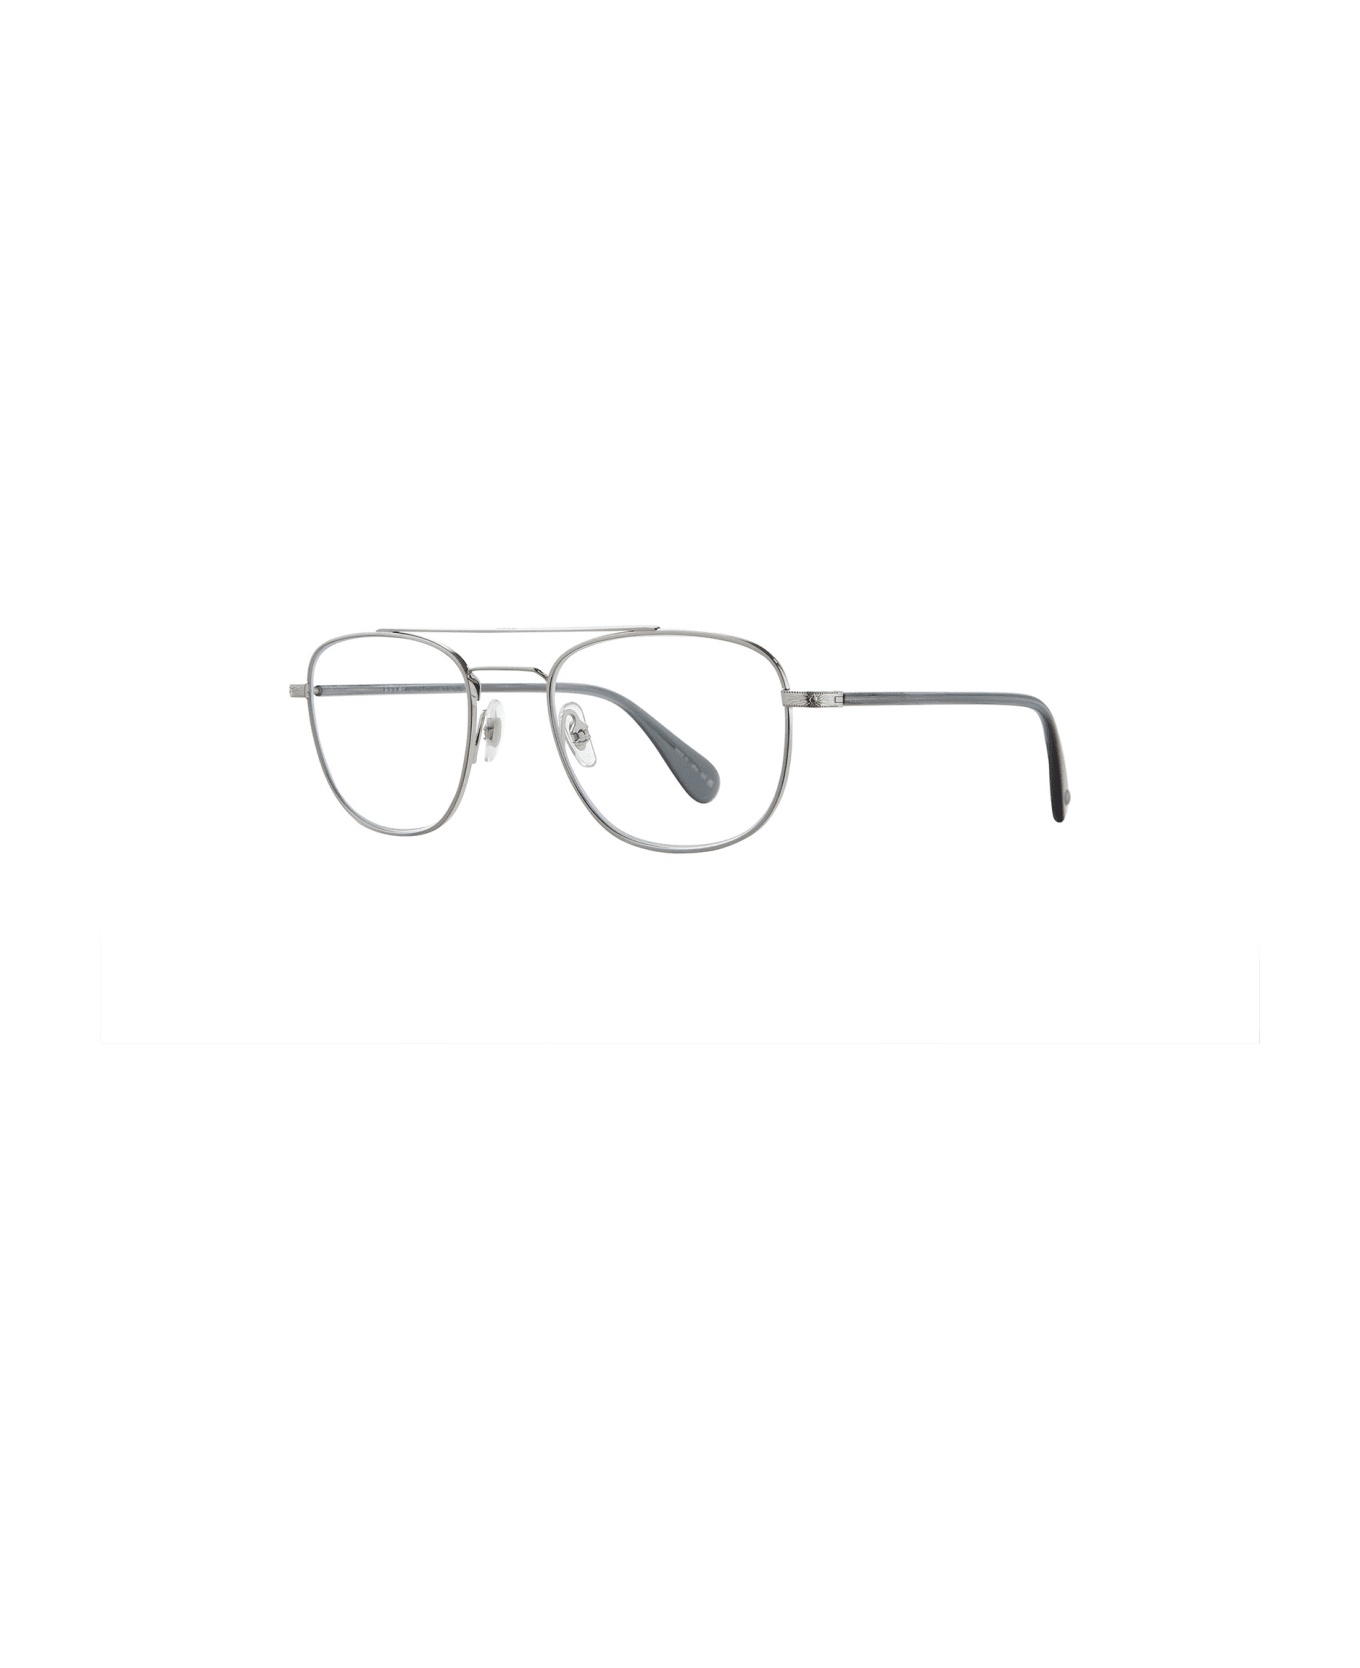 Garrett Leight Clubhouse Ii Brushed Silver Glasses - Brushed Silver アイウェア